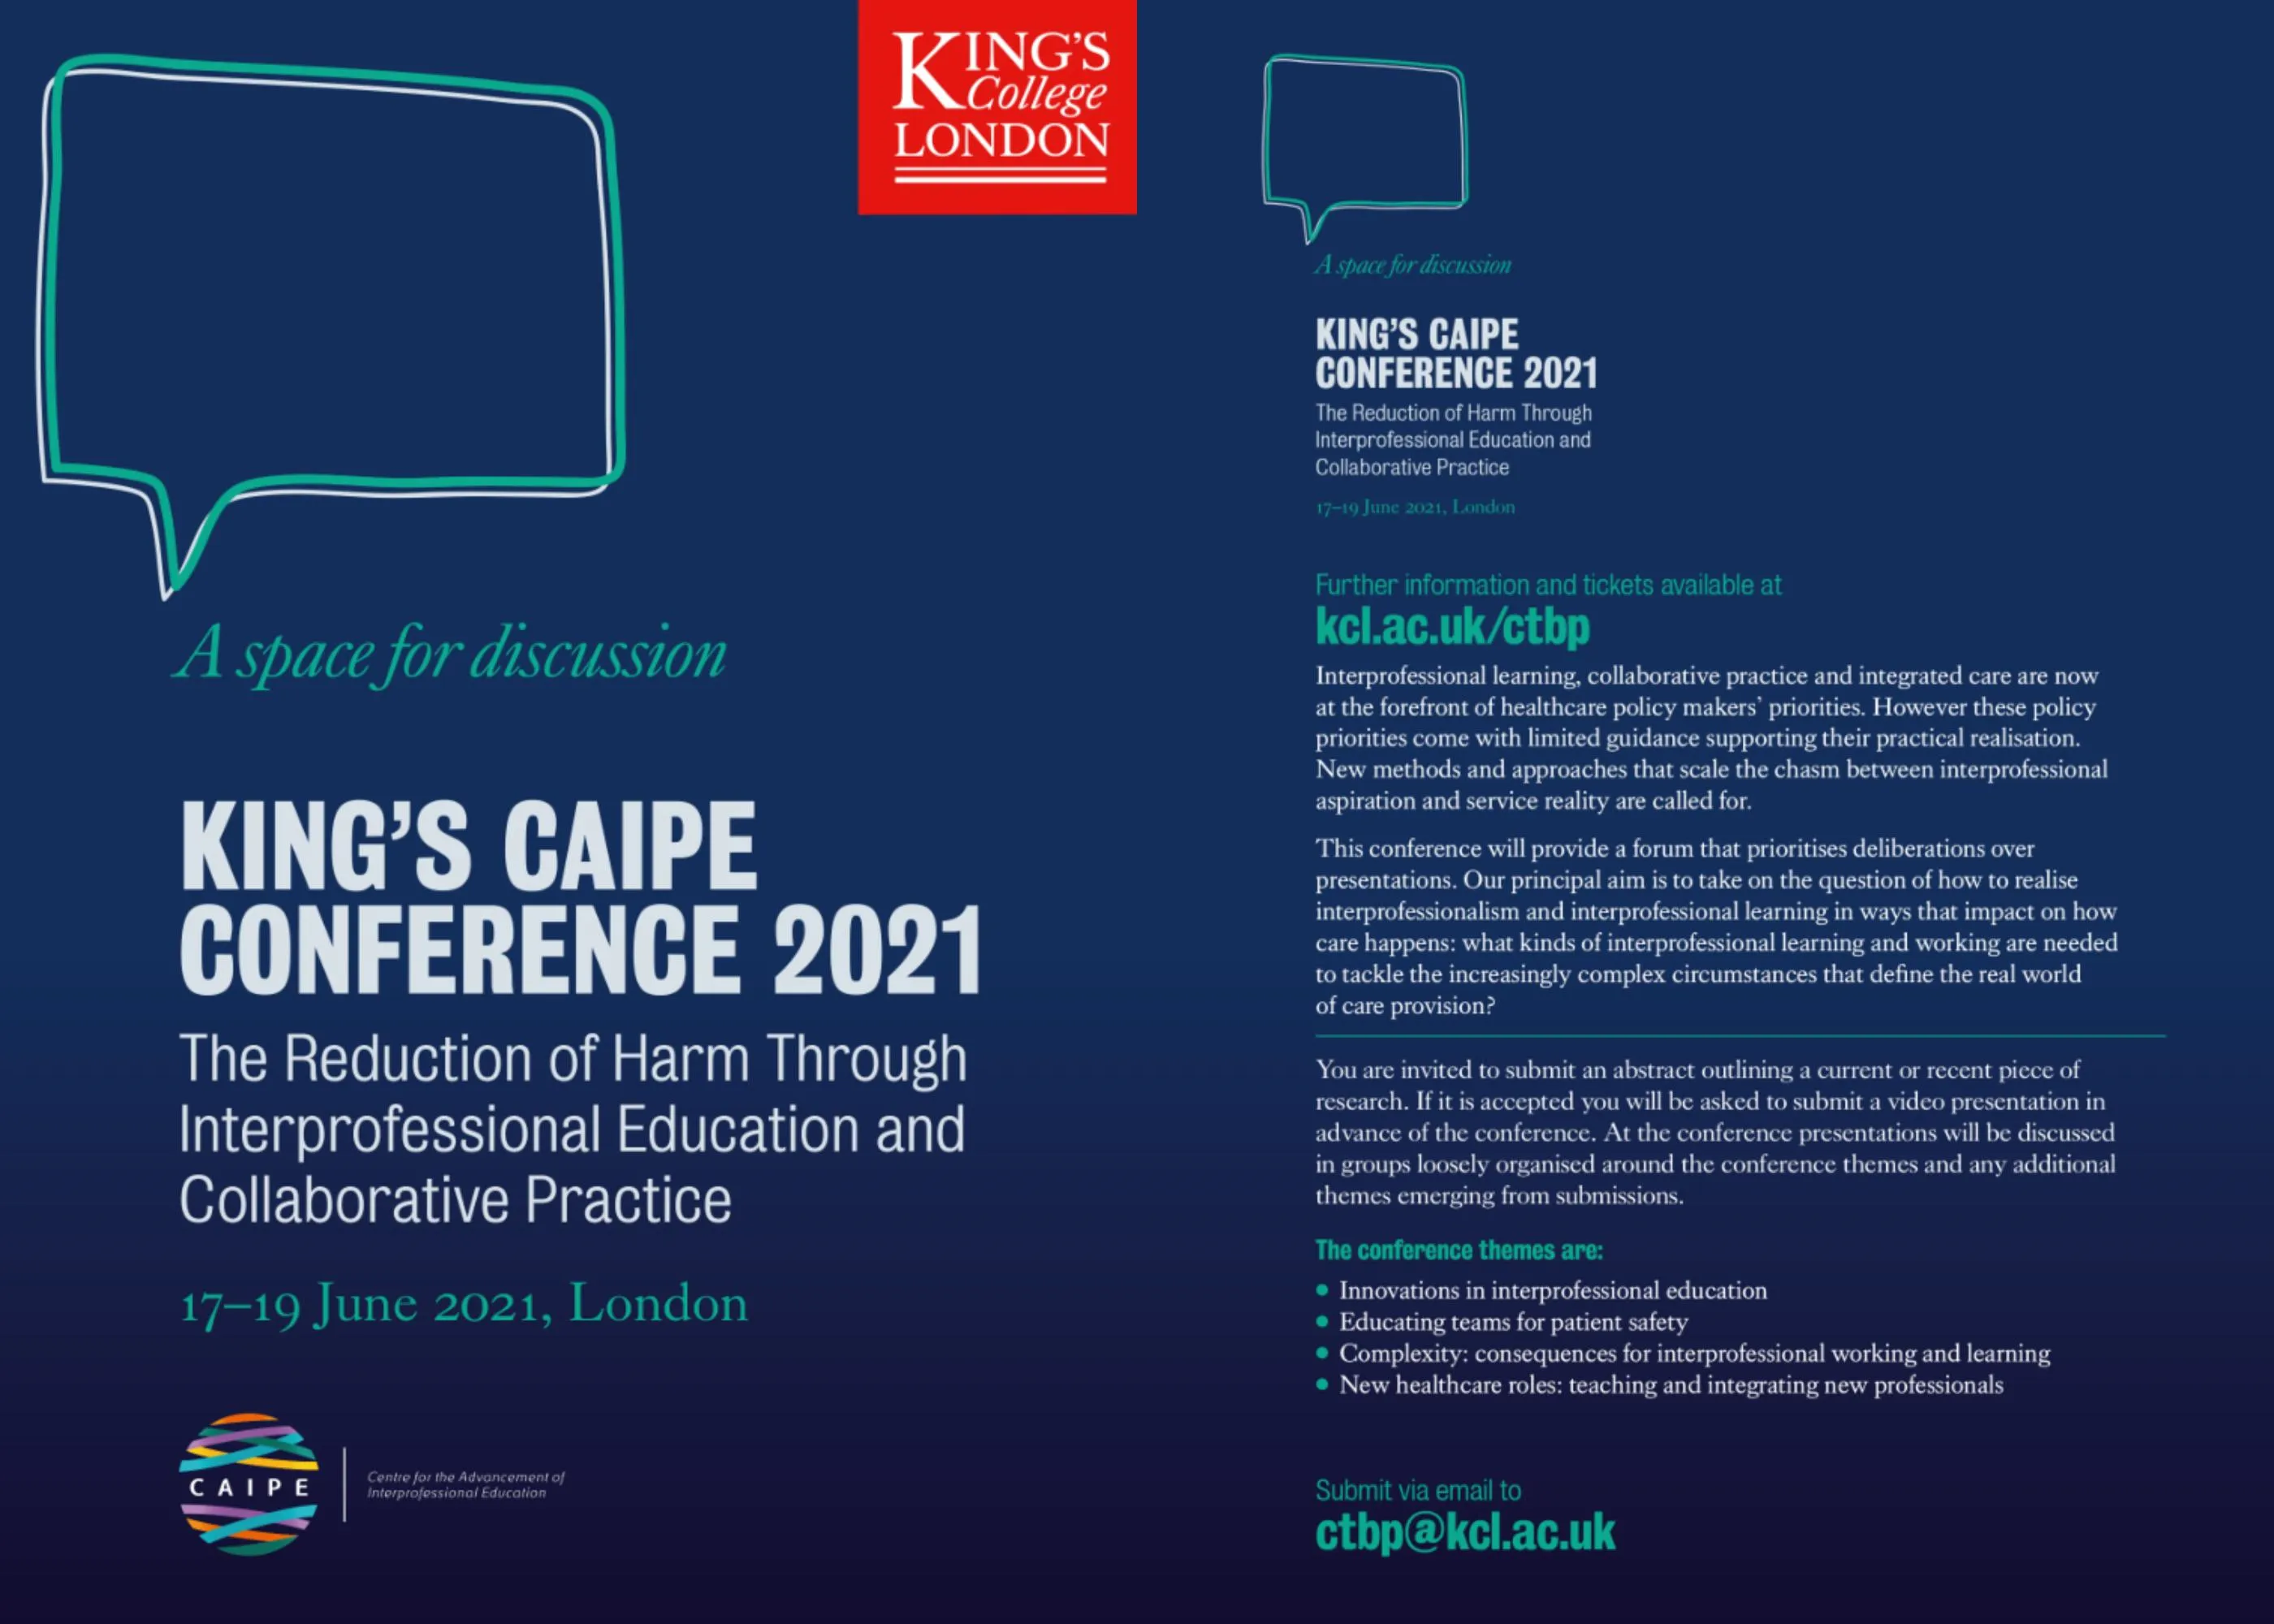 King's CAIPE Conference 2021 flyer side